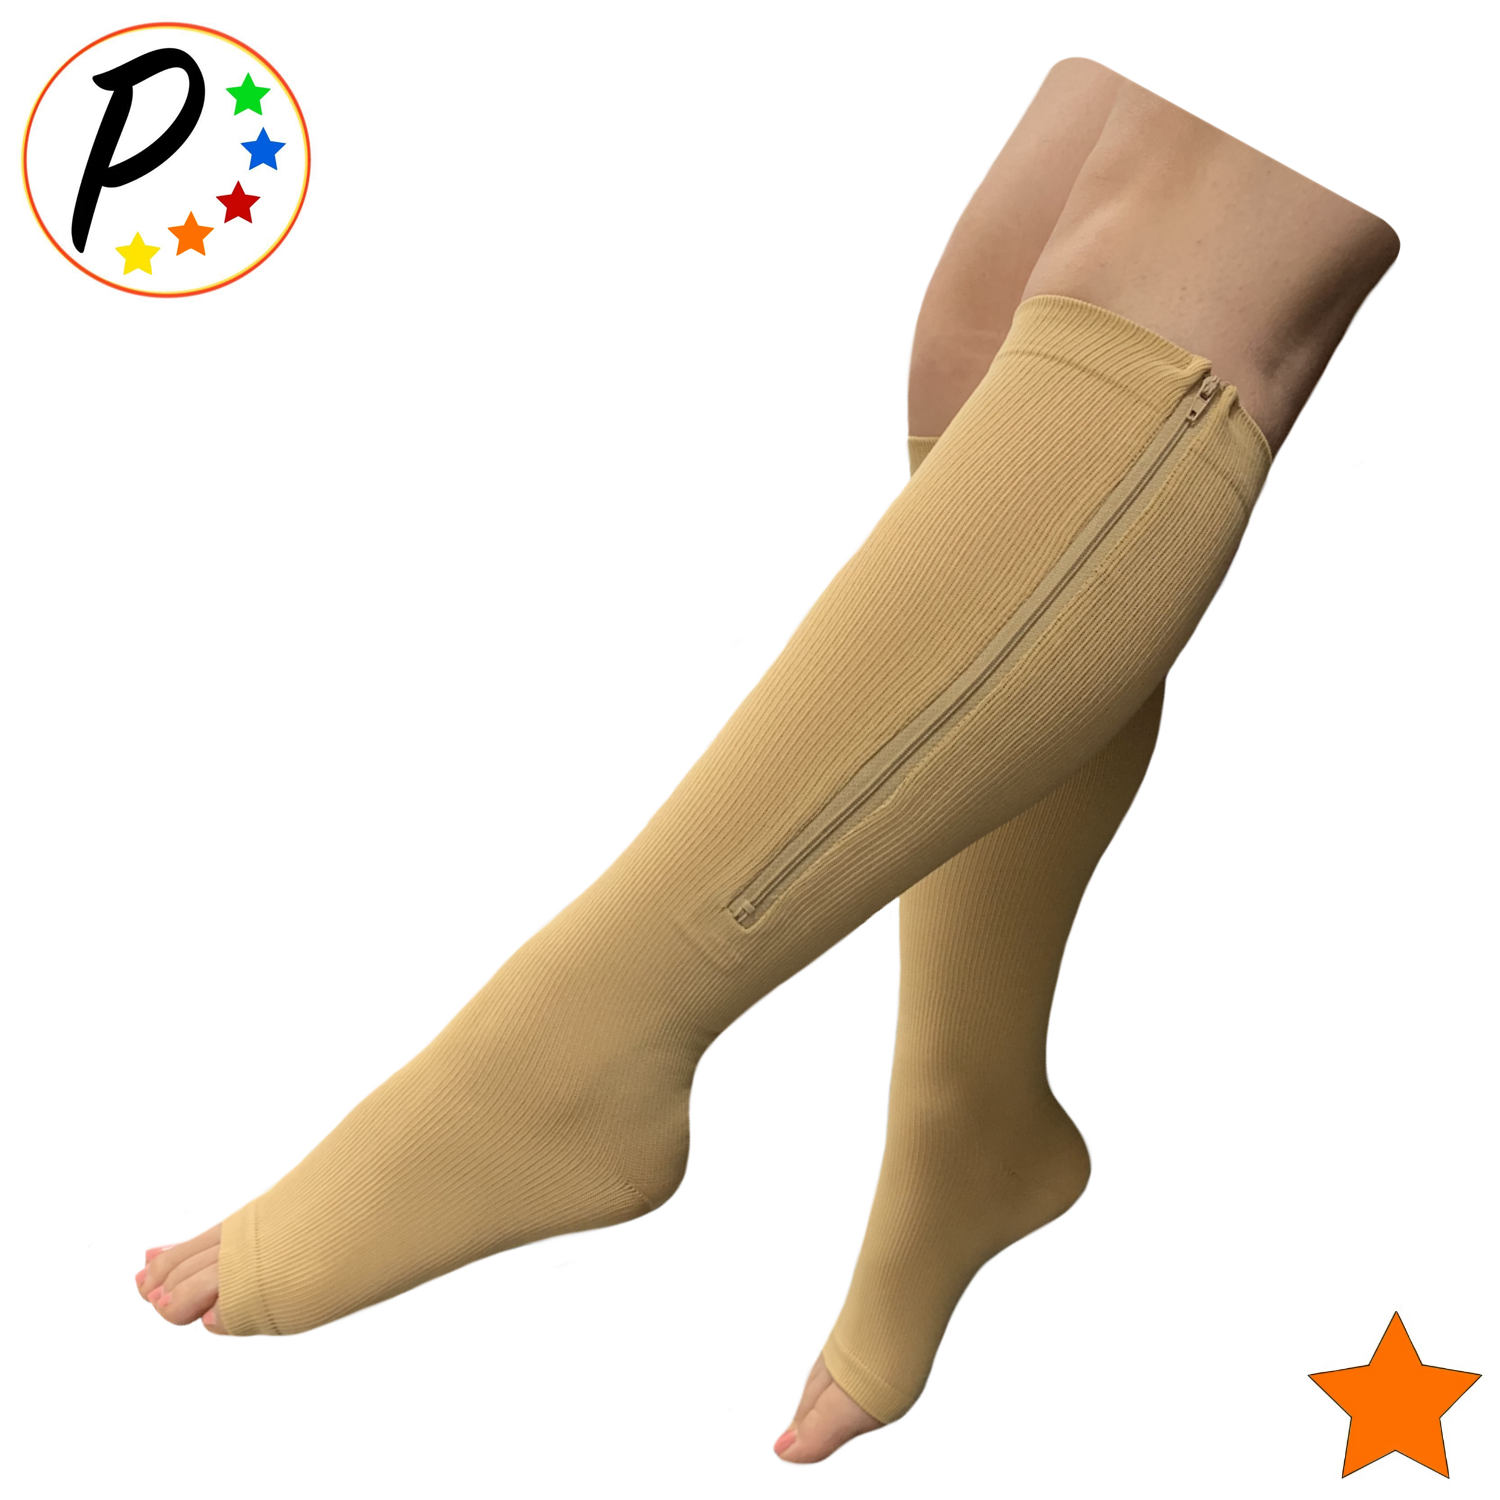 Medical Zippered Compression Socks - Open Toe 15-20 mmHg Varicose Veins  Compression Stockings with Zip Guard for Skin Protection, Lightweight  Diabetic Compression Socks - 3XL, Beige [1 Pair] : Health & Household 